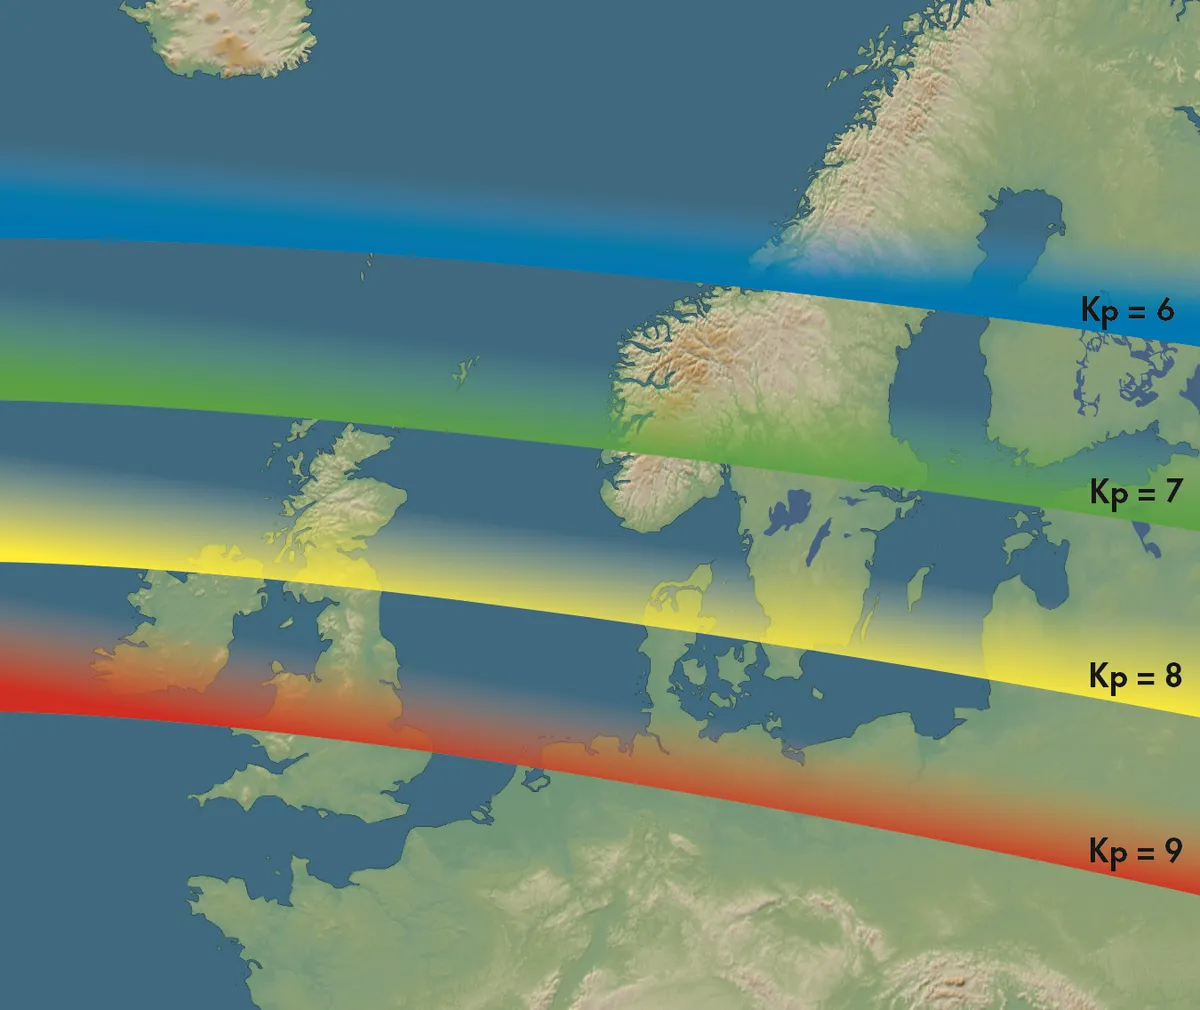 The coloured bands show the boundaries of auroral activity based on the Kp index.